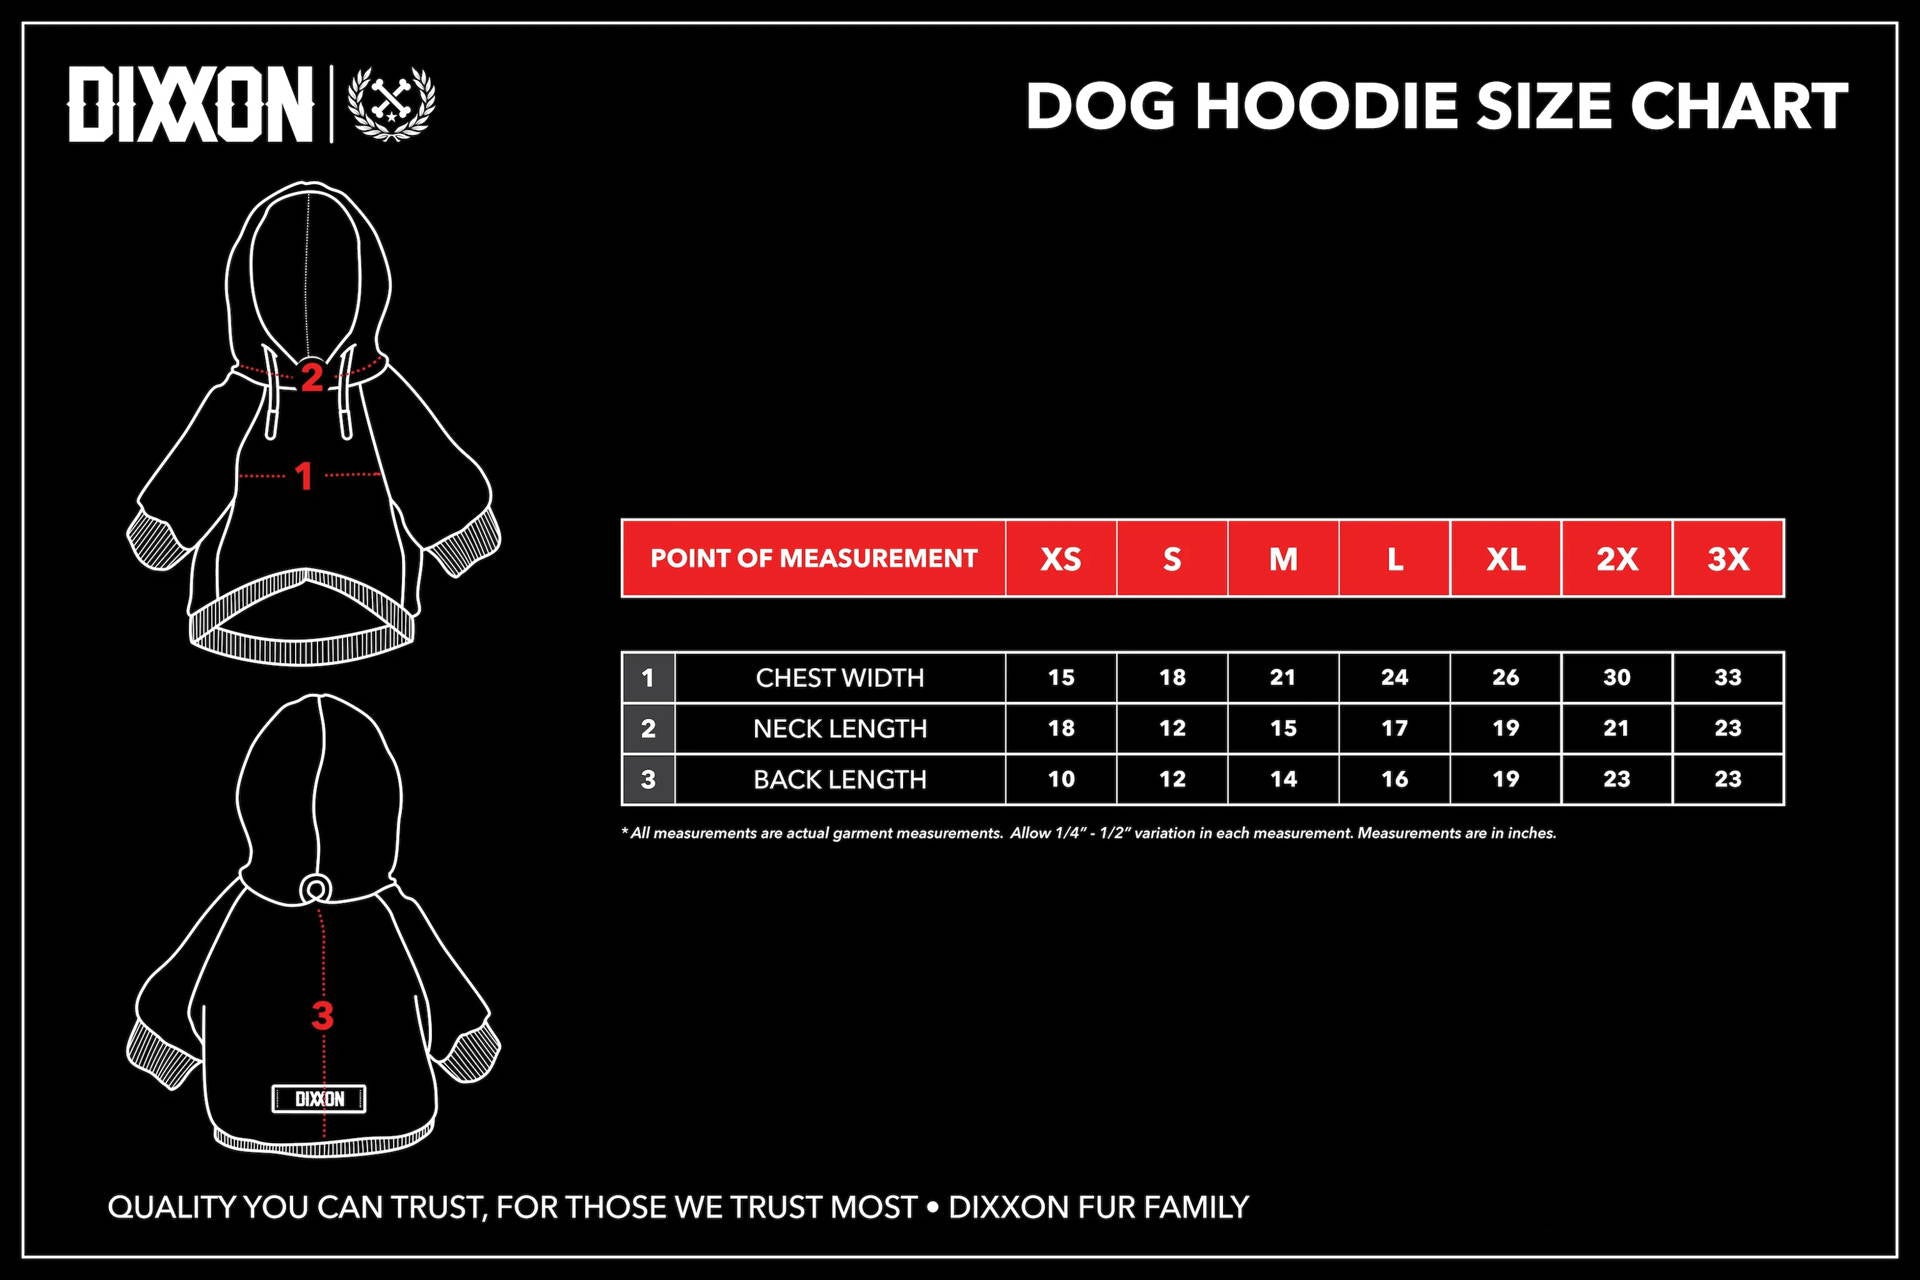 Dog Hoodies Size Guide